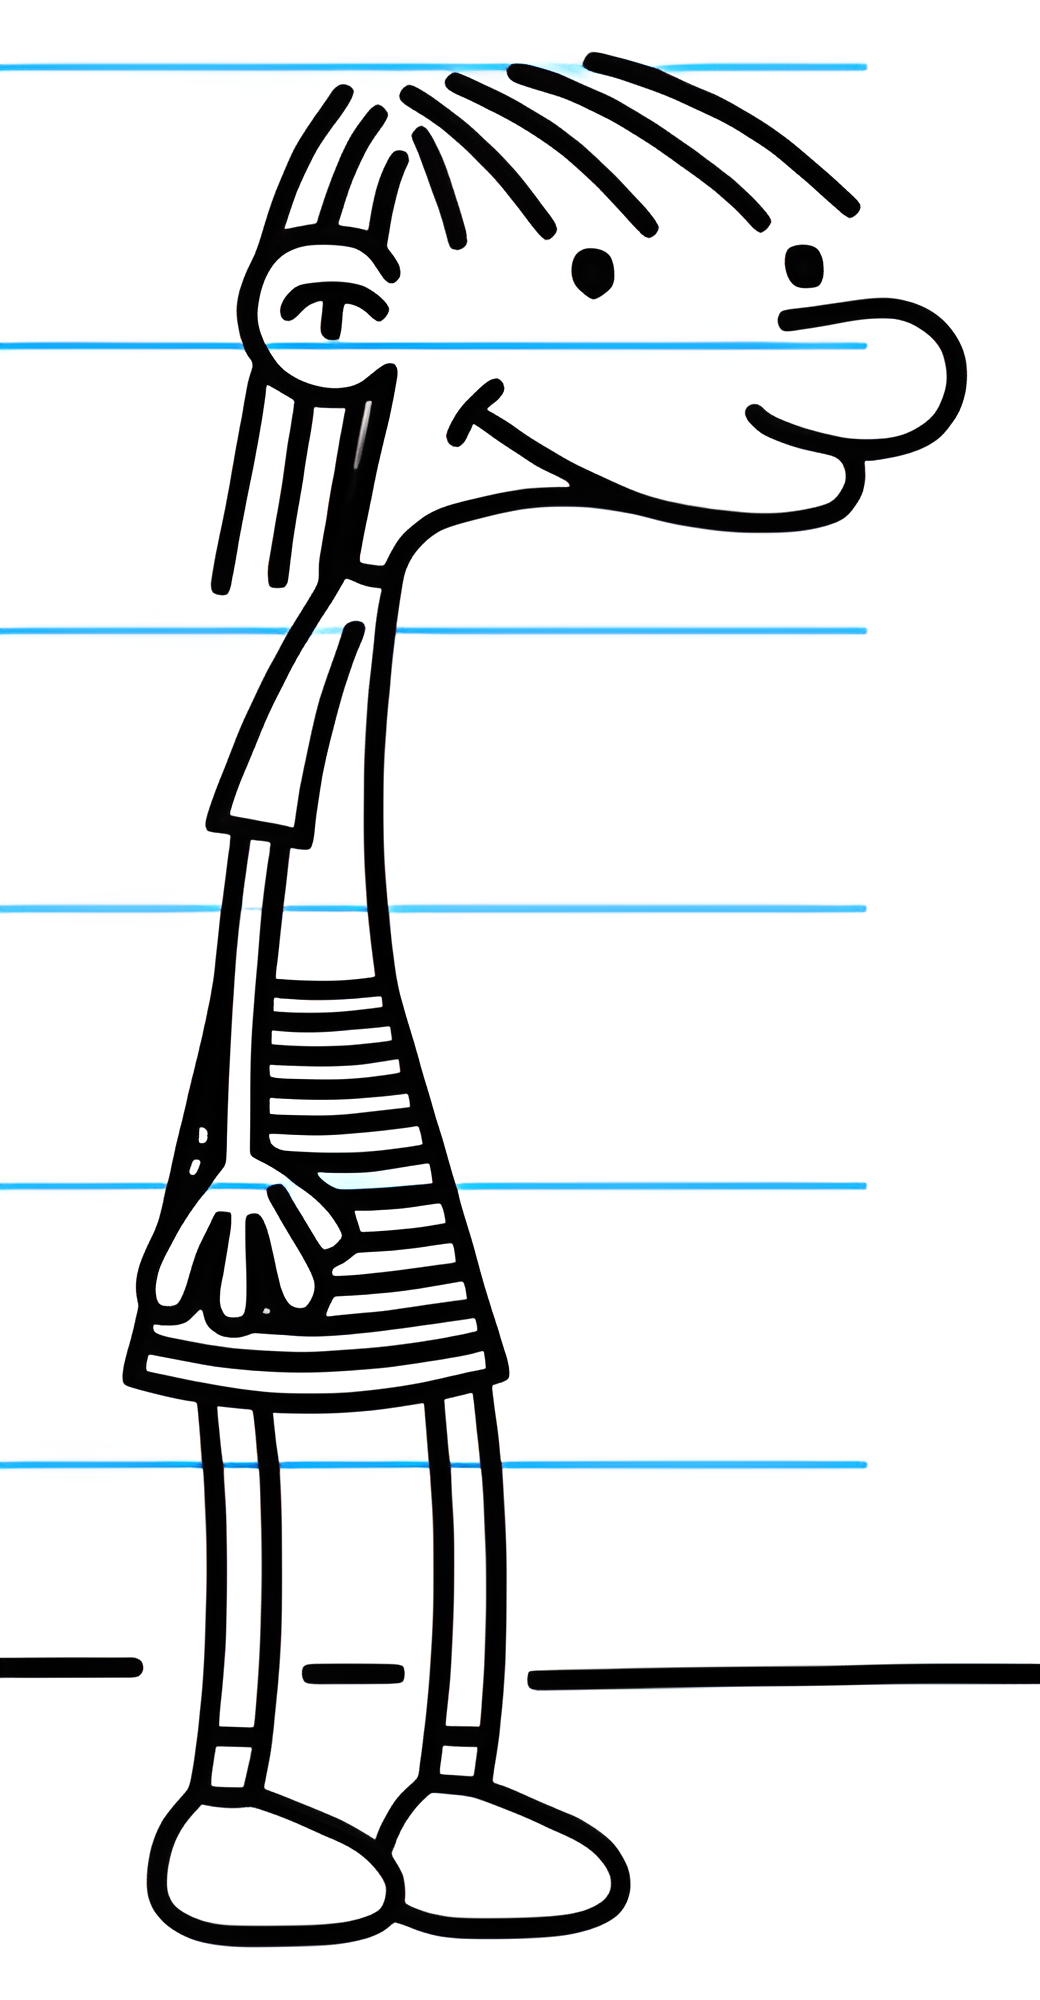 Diary Of A Wimpy Kid Characters The Third Wheel